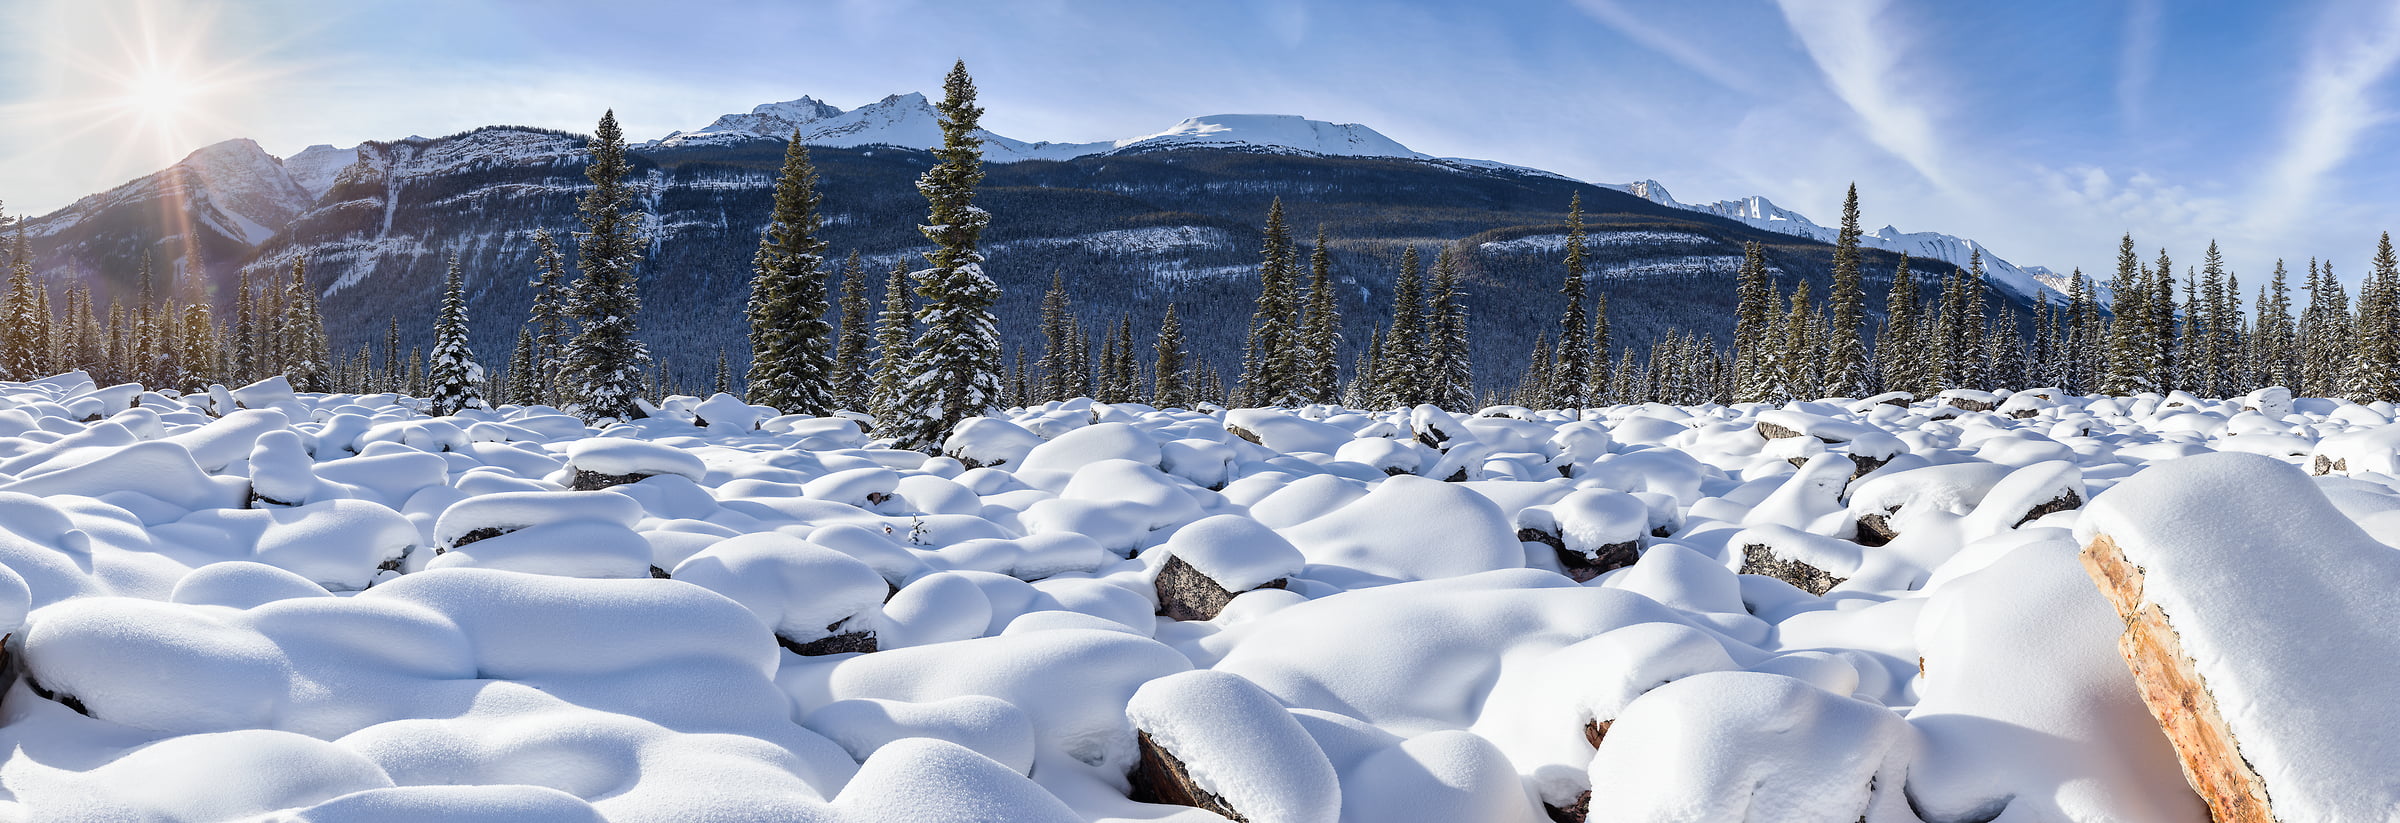 1,694 megapixels! A very high resolution, large-format VAST photo print of a winter landscape scene with snow-covered rocks, evergreen trees, and mountains; landscape photograph created by Scott Dimond in Jasper National Park, Alberta, Canada.